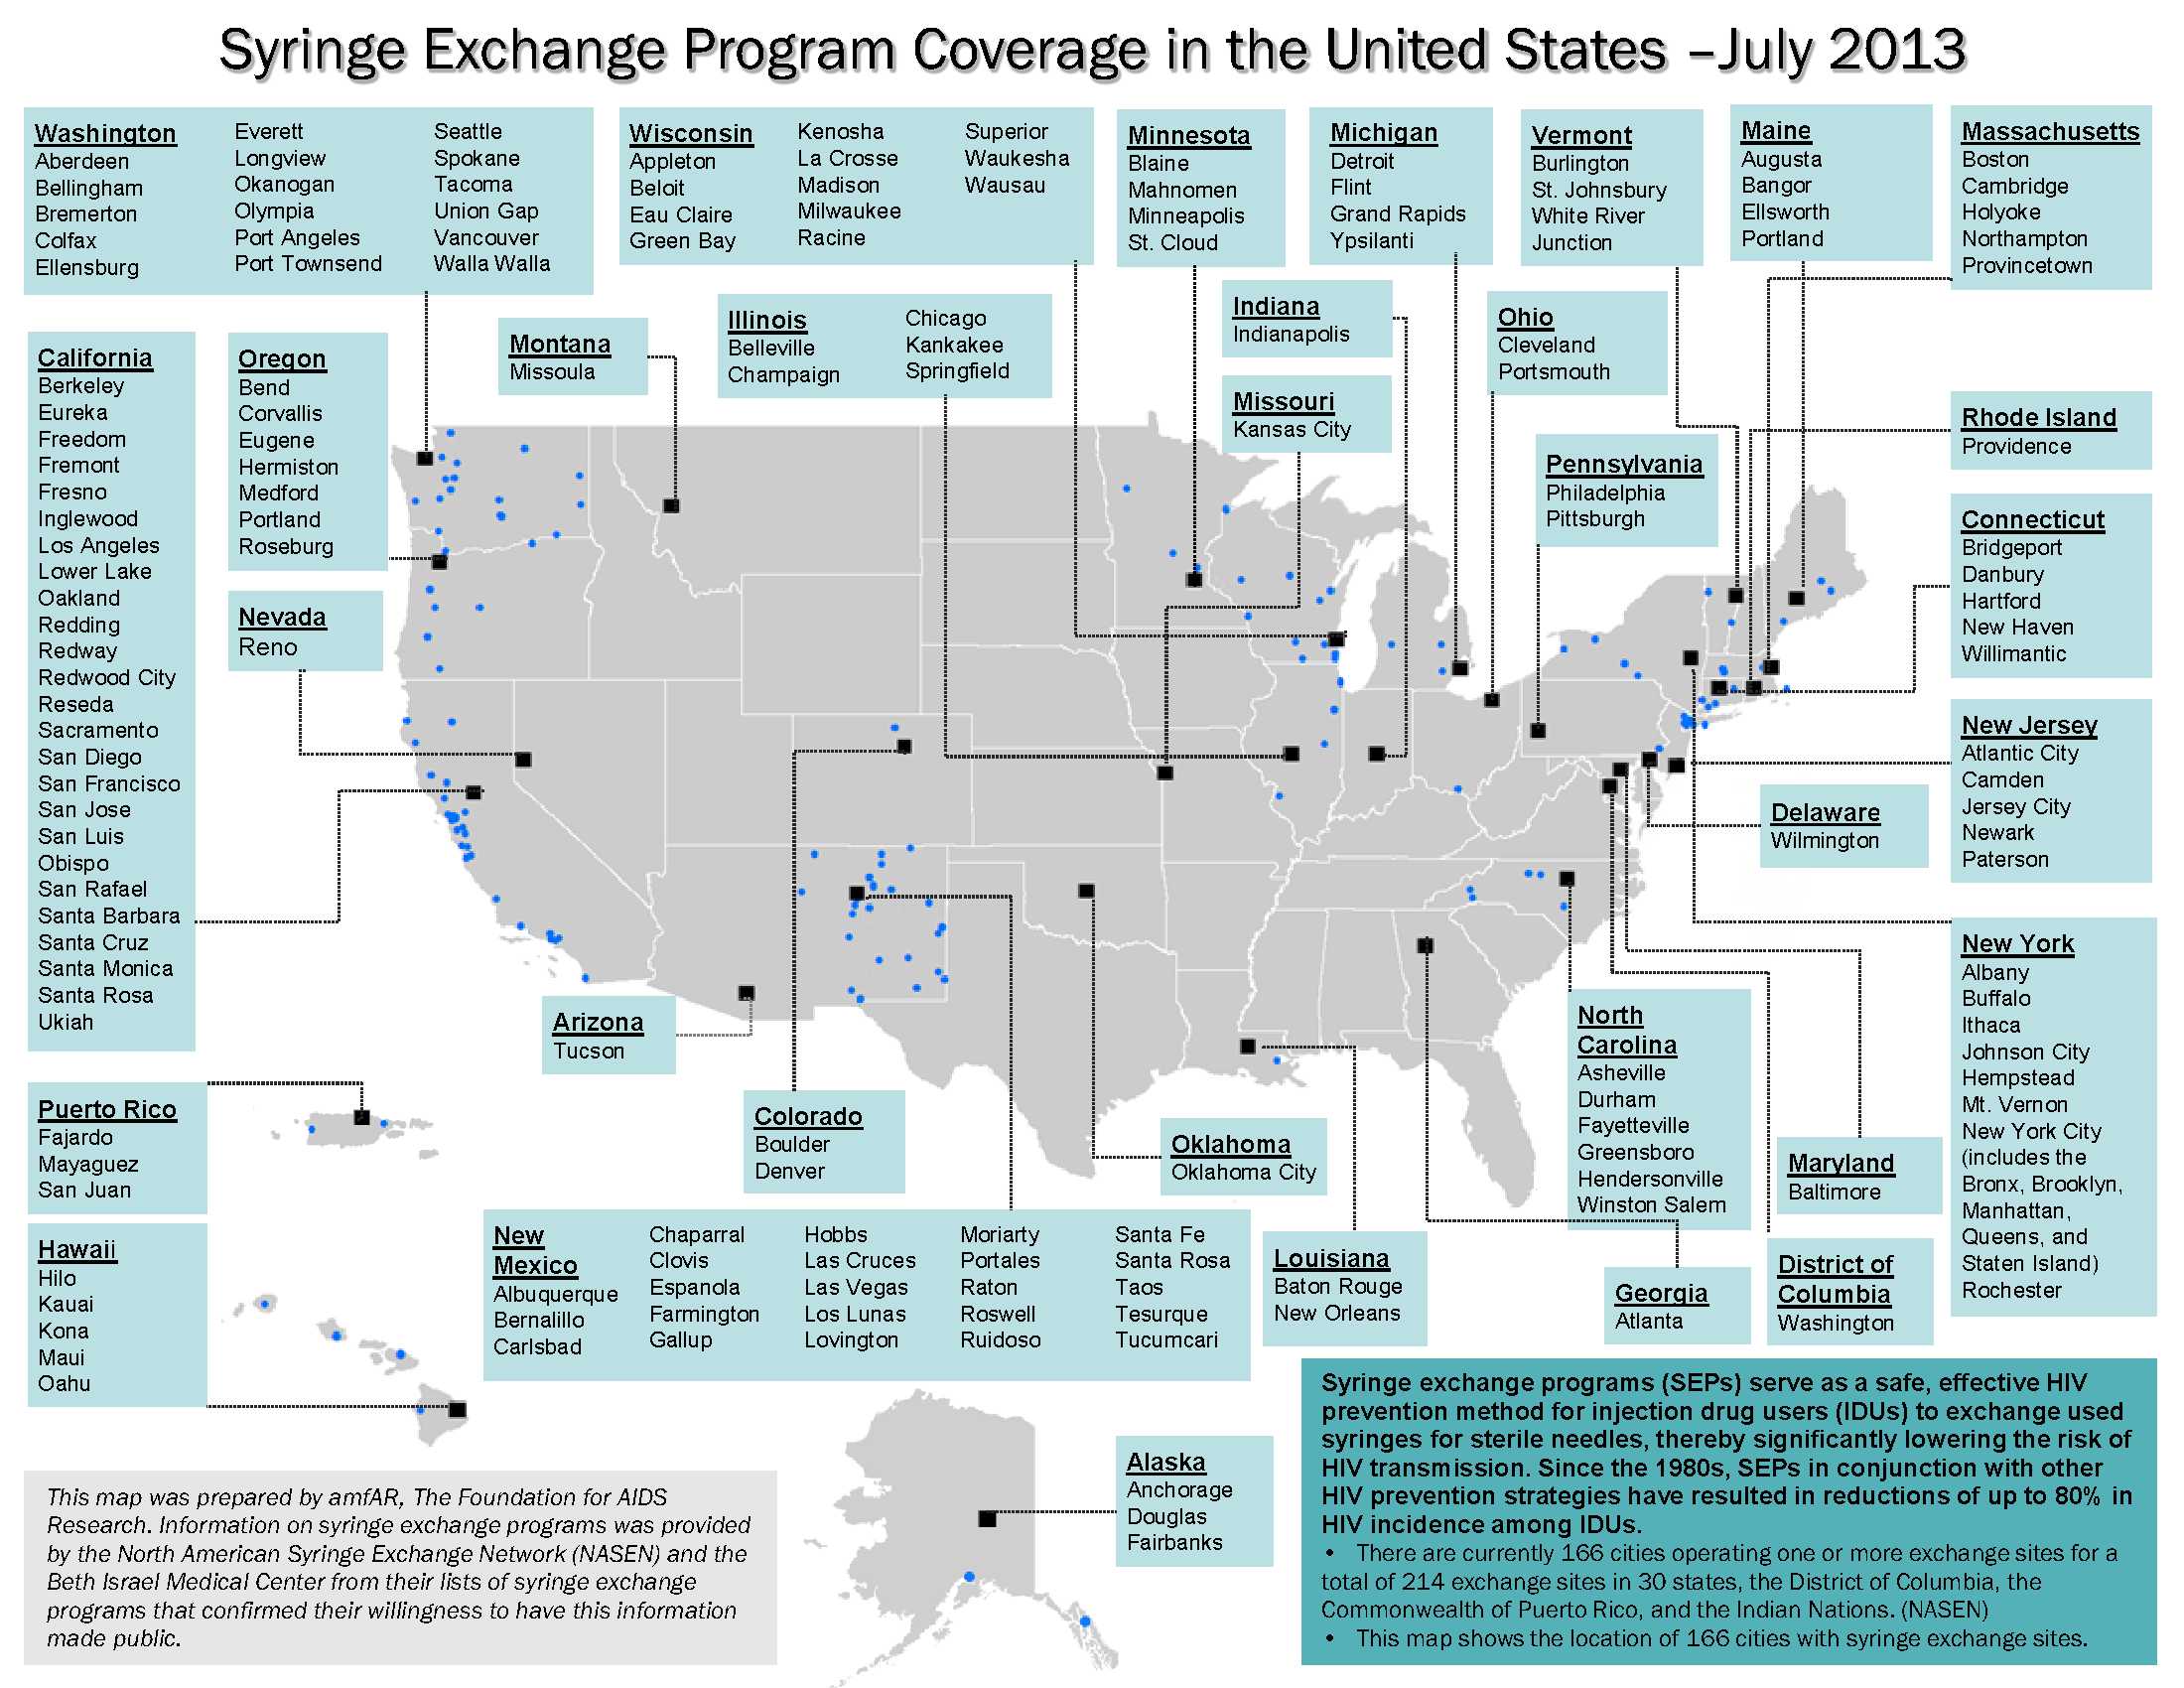 Syringe Exchange Programs by State